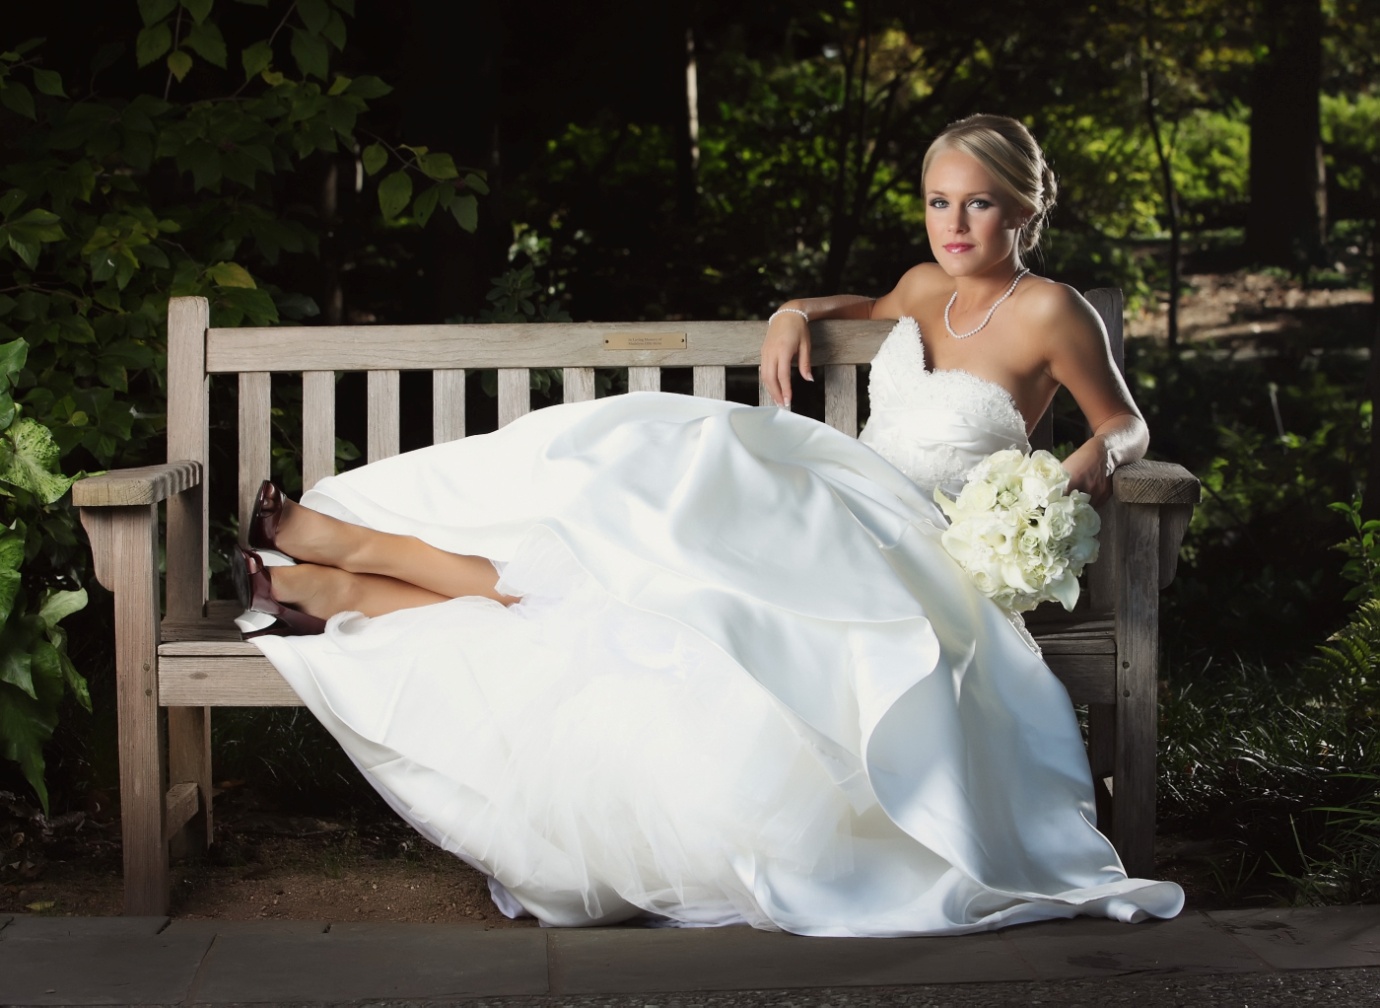 Quick Tips On How To Photograph A Bride In Harsh Sunlight With Kevin Jairaj